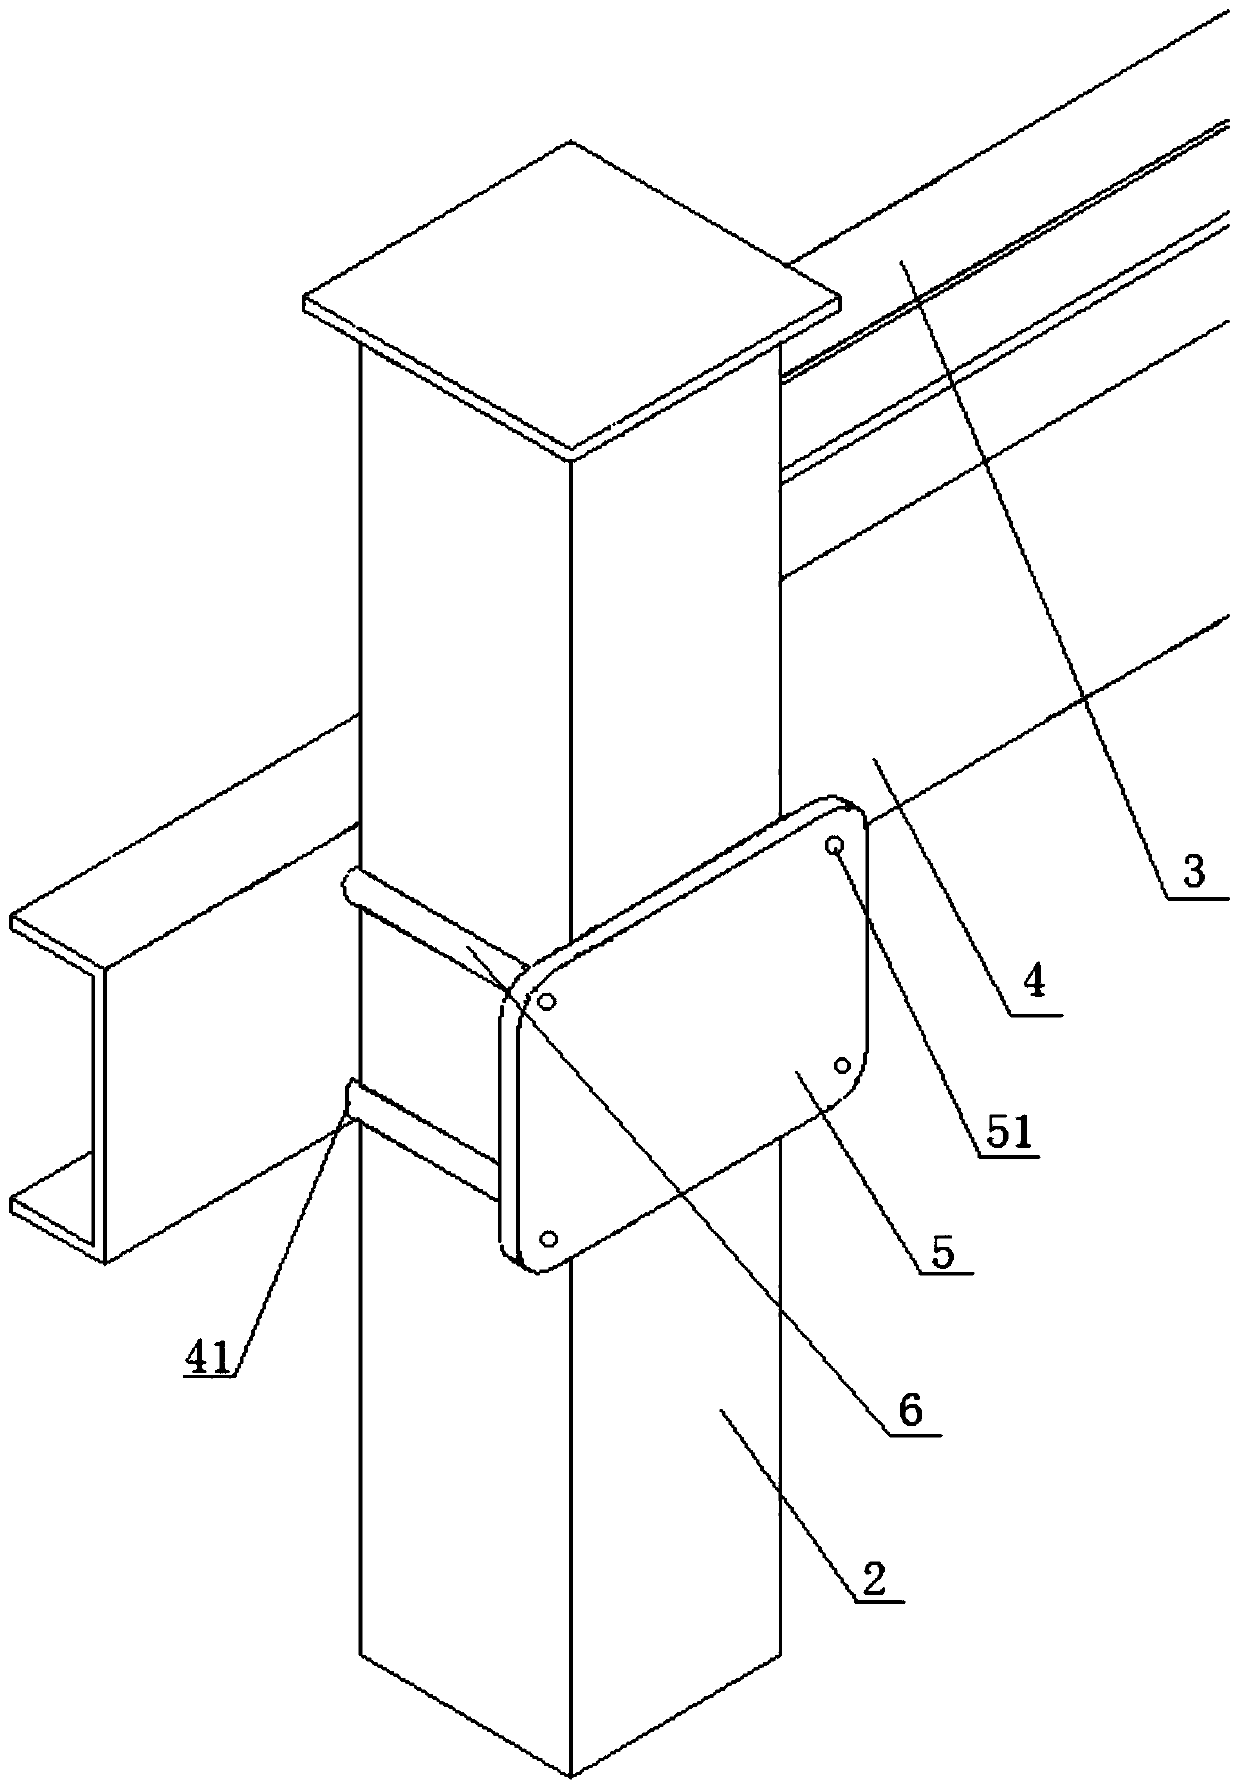 Hoisting method for deck piping system unit module